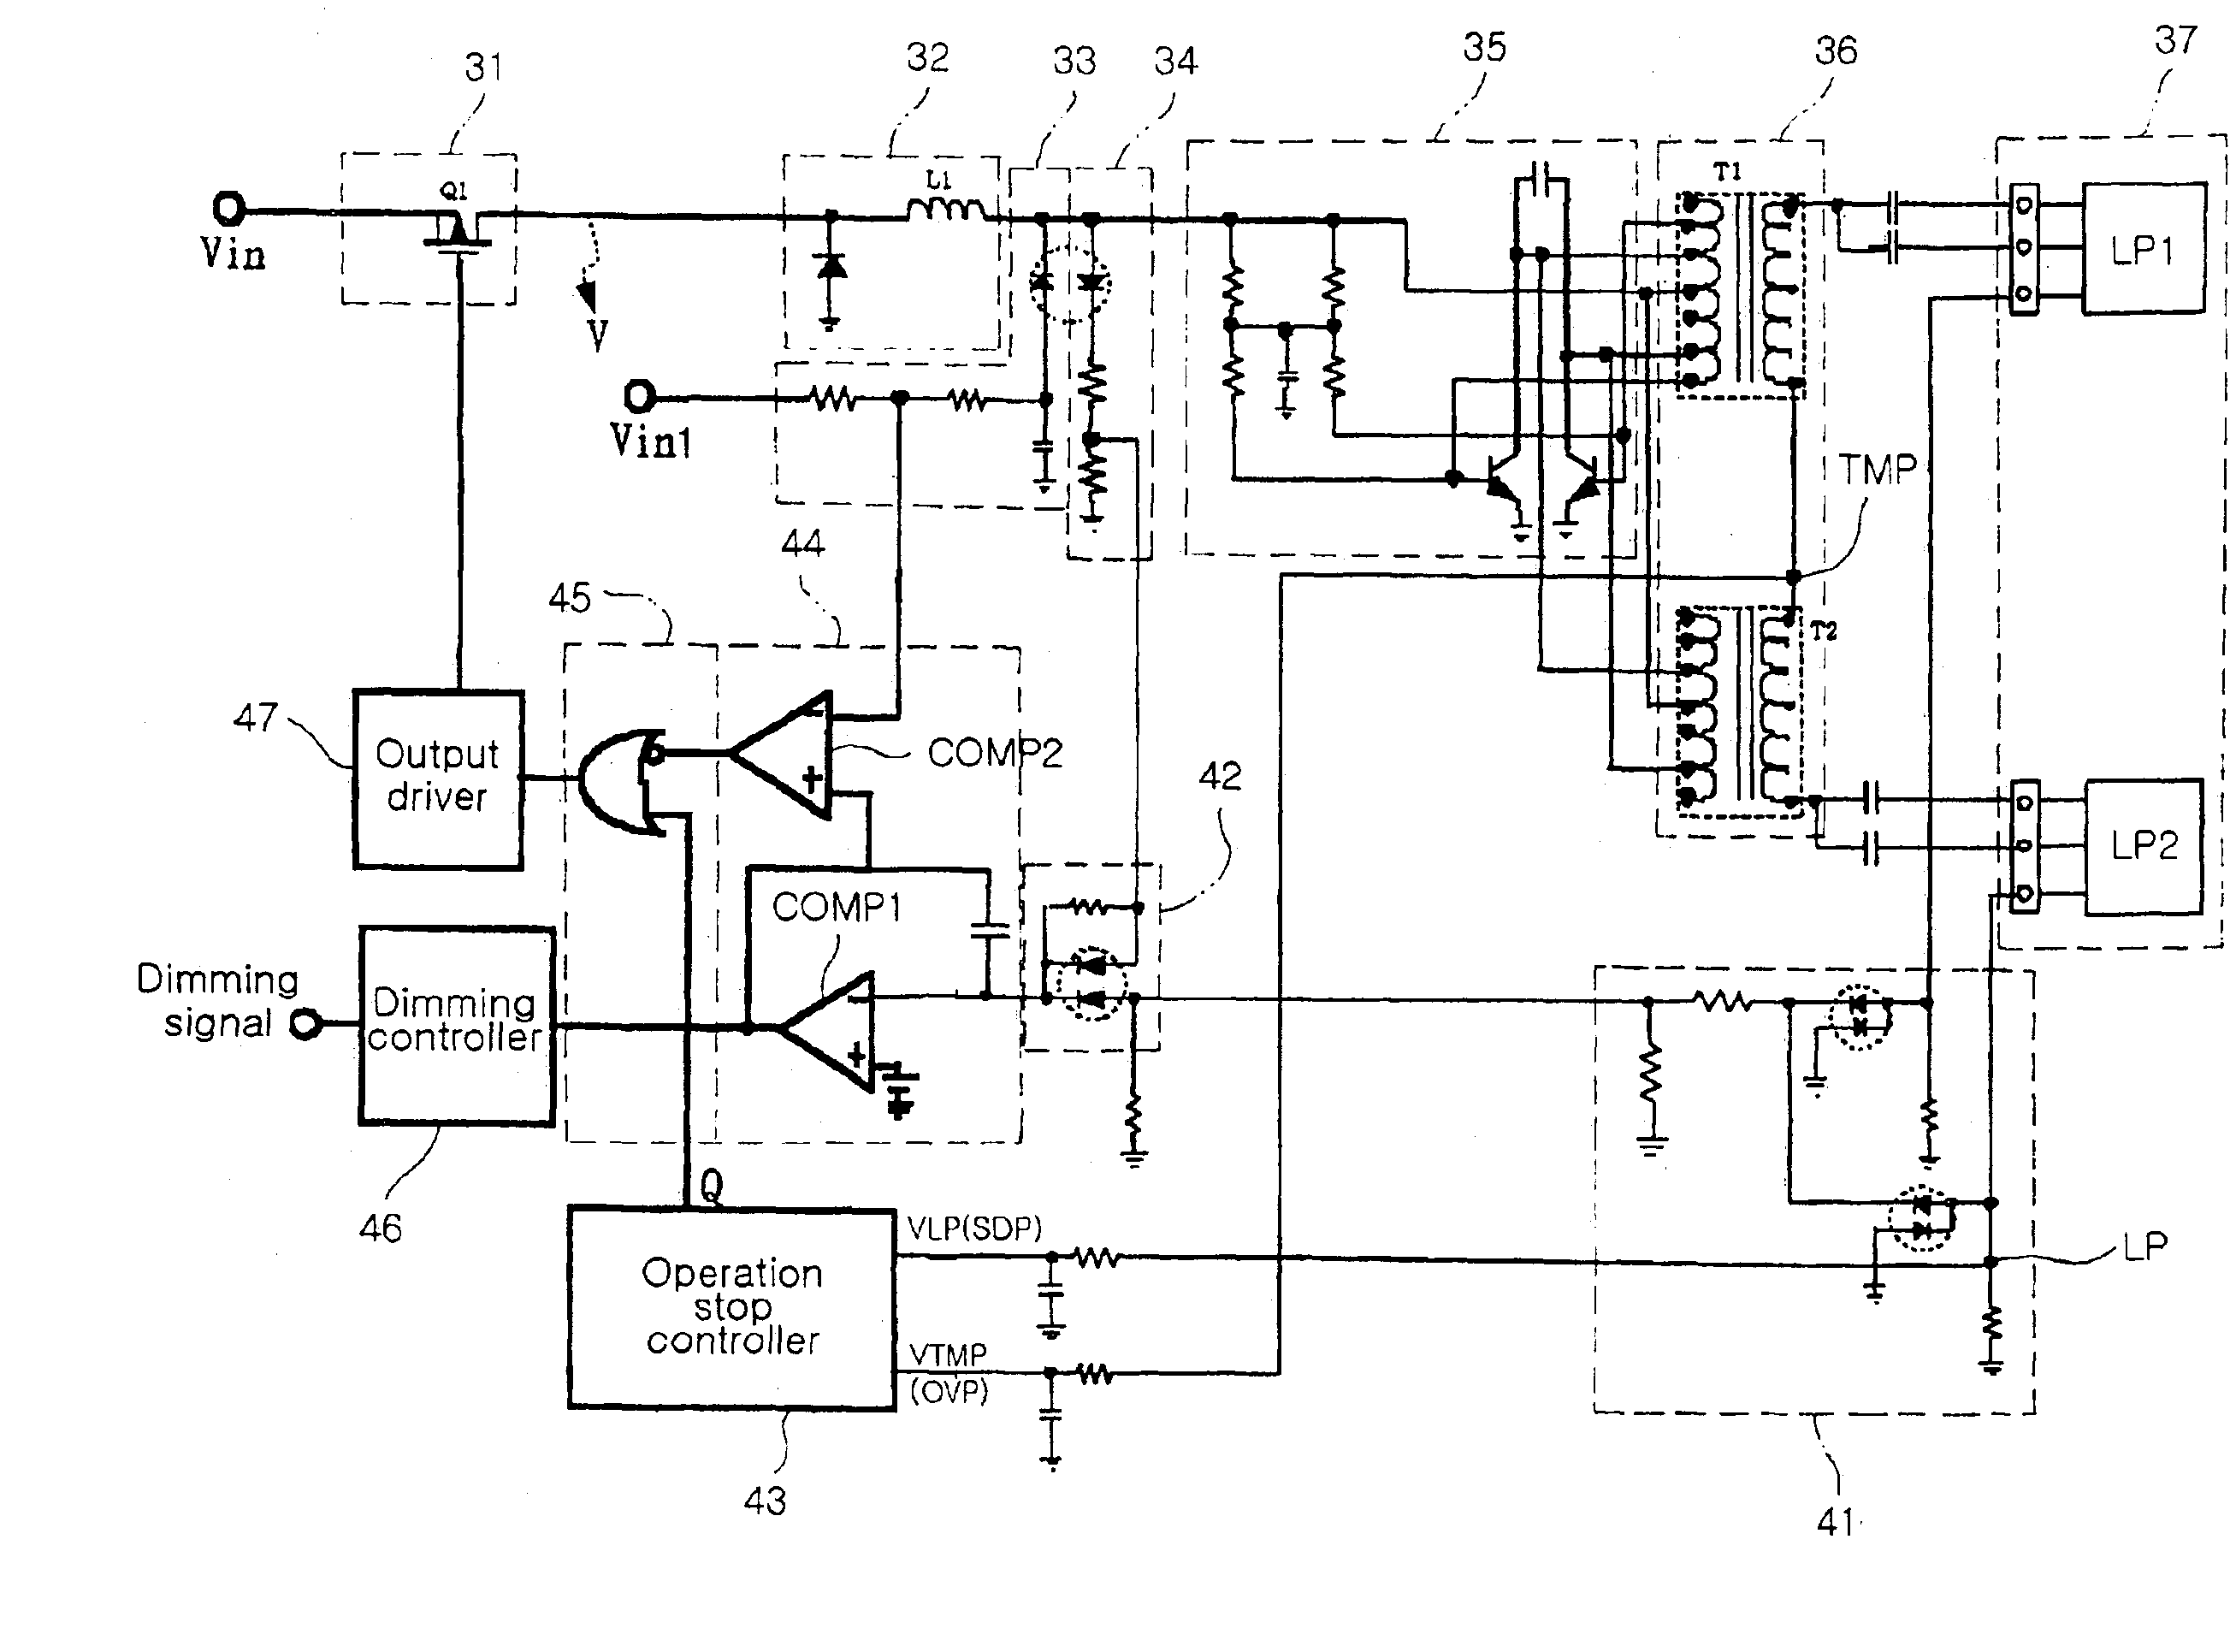 Backlight inverter for liquid crystal display panel with self-protection function